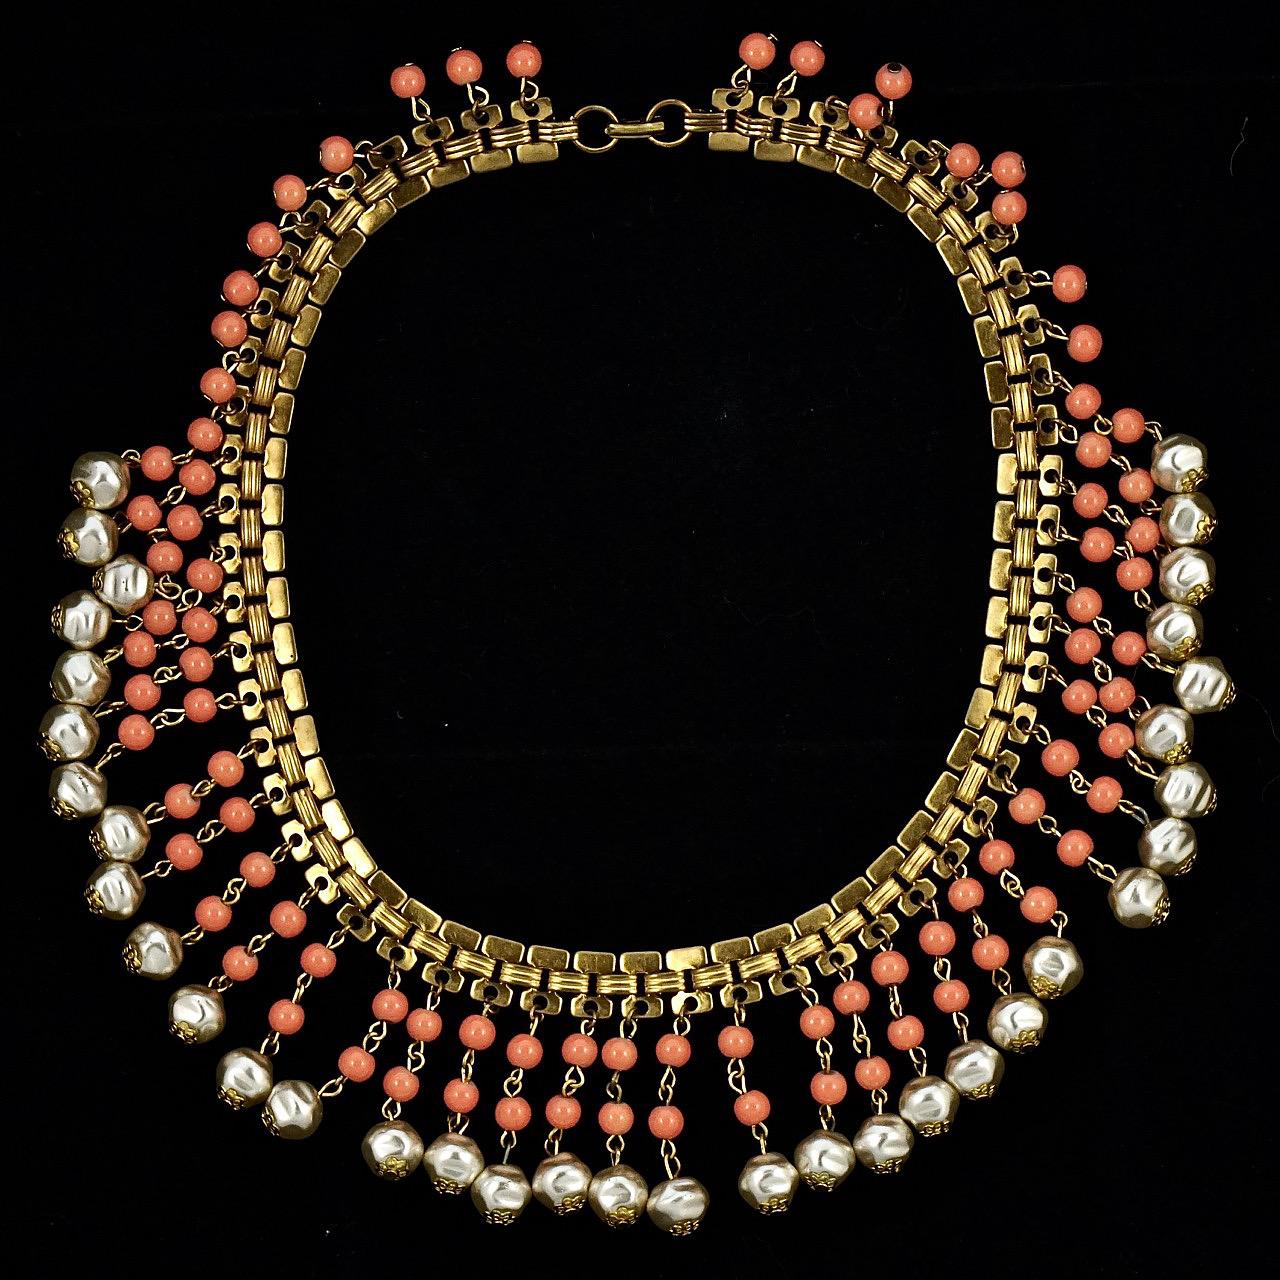 Gold Plated Coral Glass Bead Faux Baroque Pearl Drop Collar Necklace circa 1950s For Sale 3